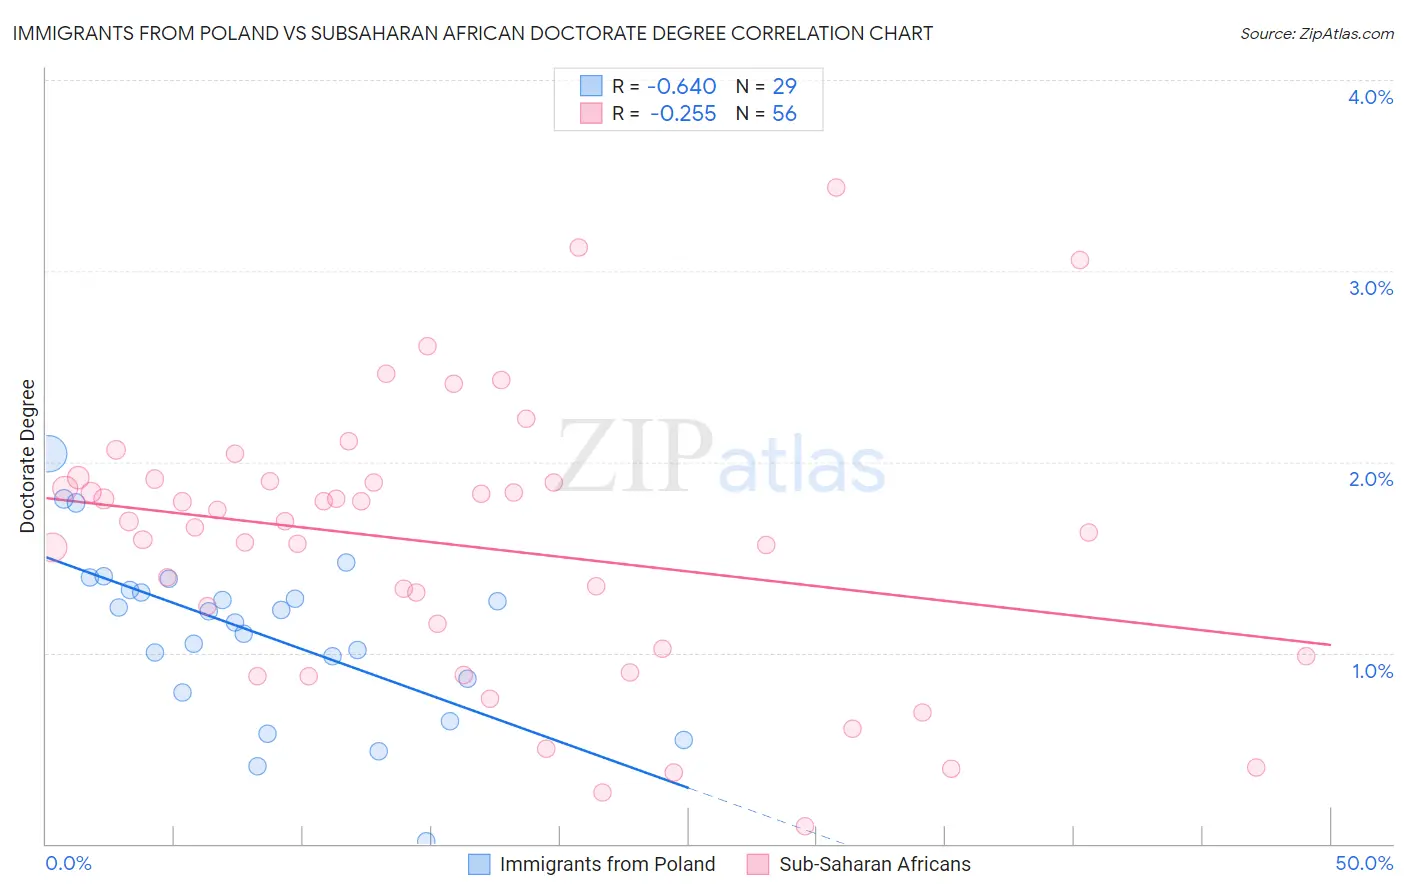 Immigrants from Poland vs Subsaharan African Doctorate Degree